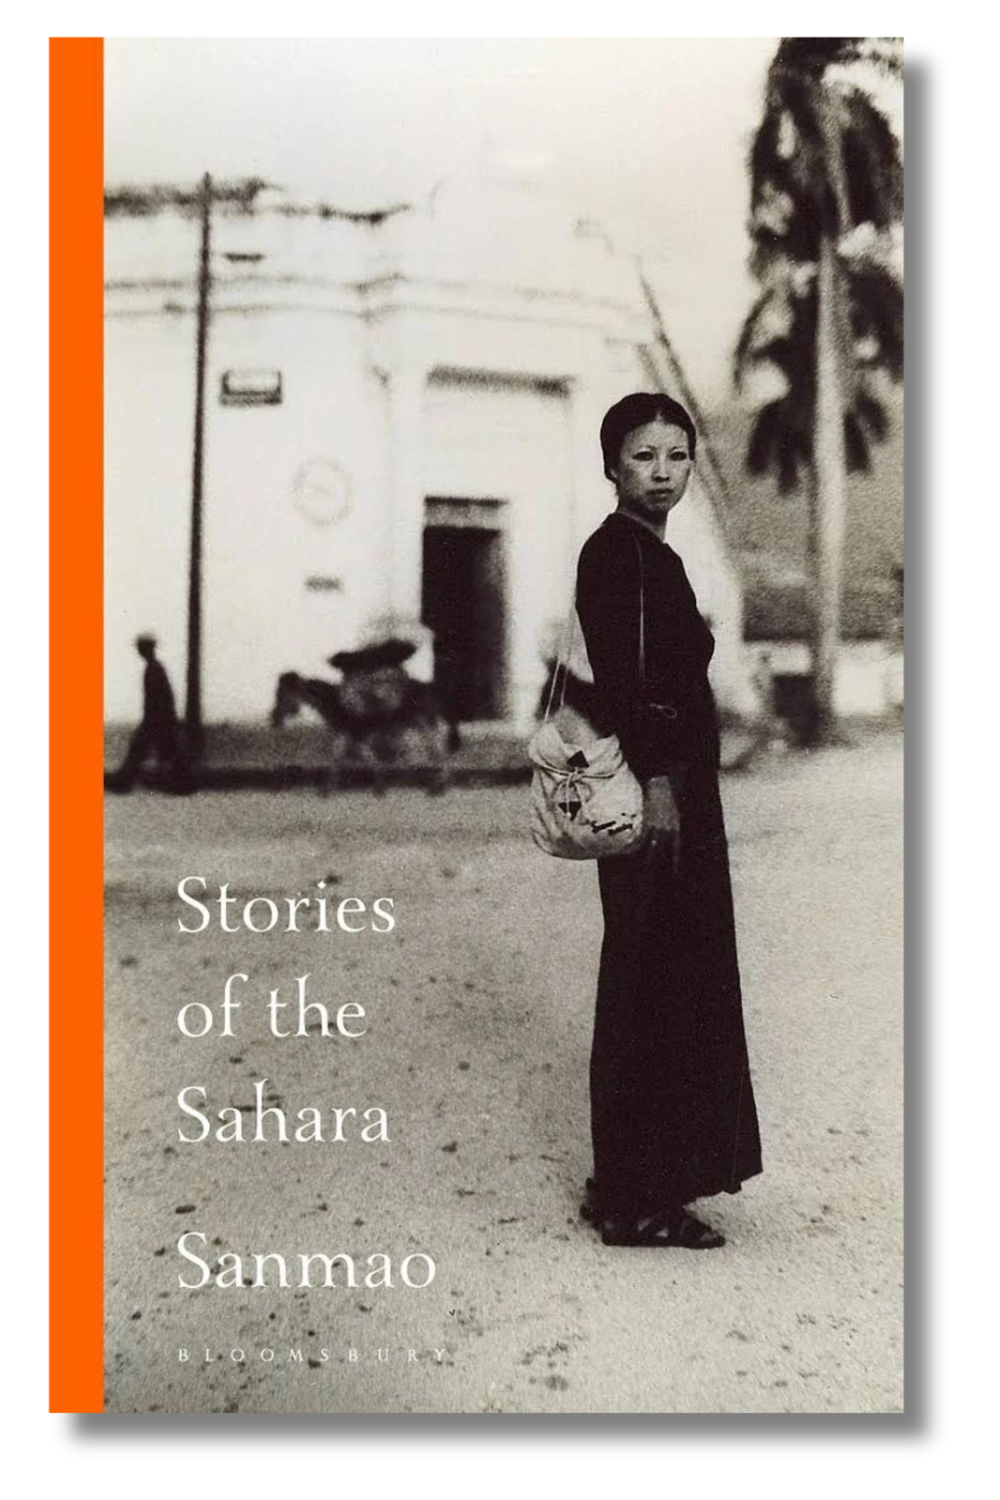 The cover of "Stories of the Sahara" by Sanmao, translated by Mike Fu